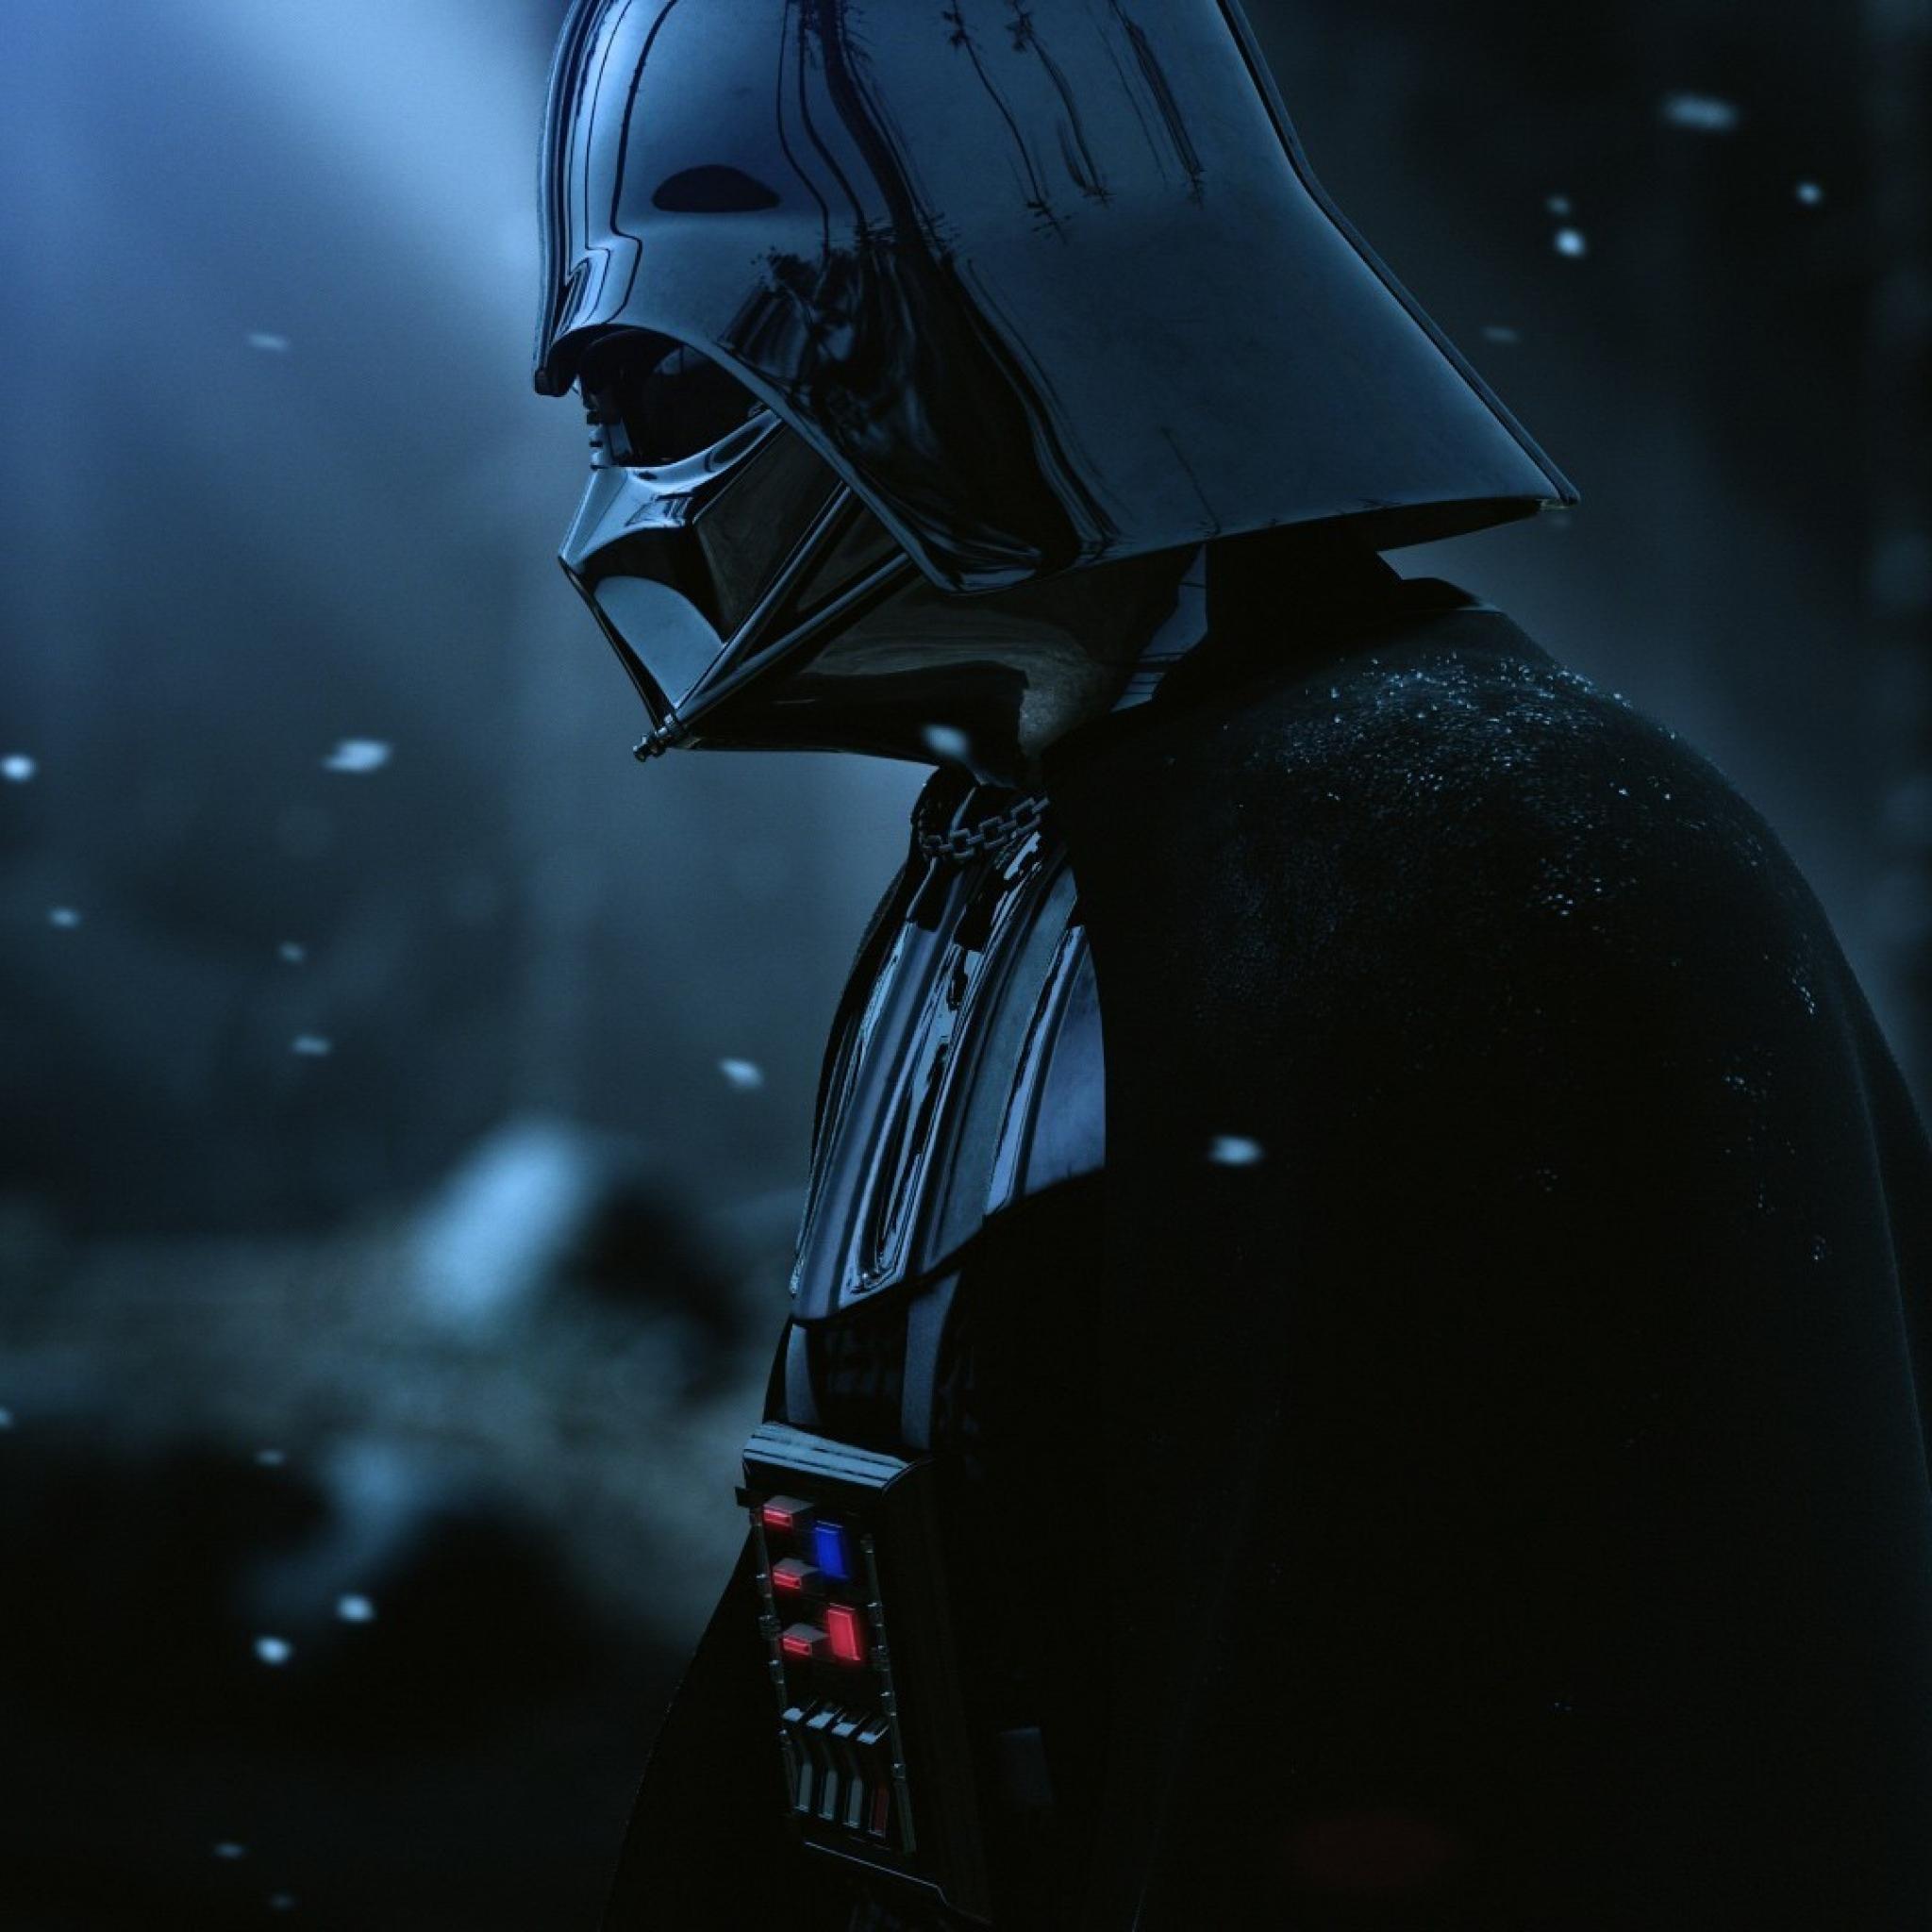 Star Wars wallpaper for iPhone and iPad